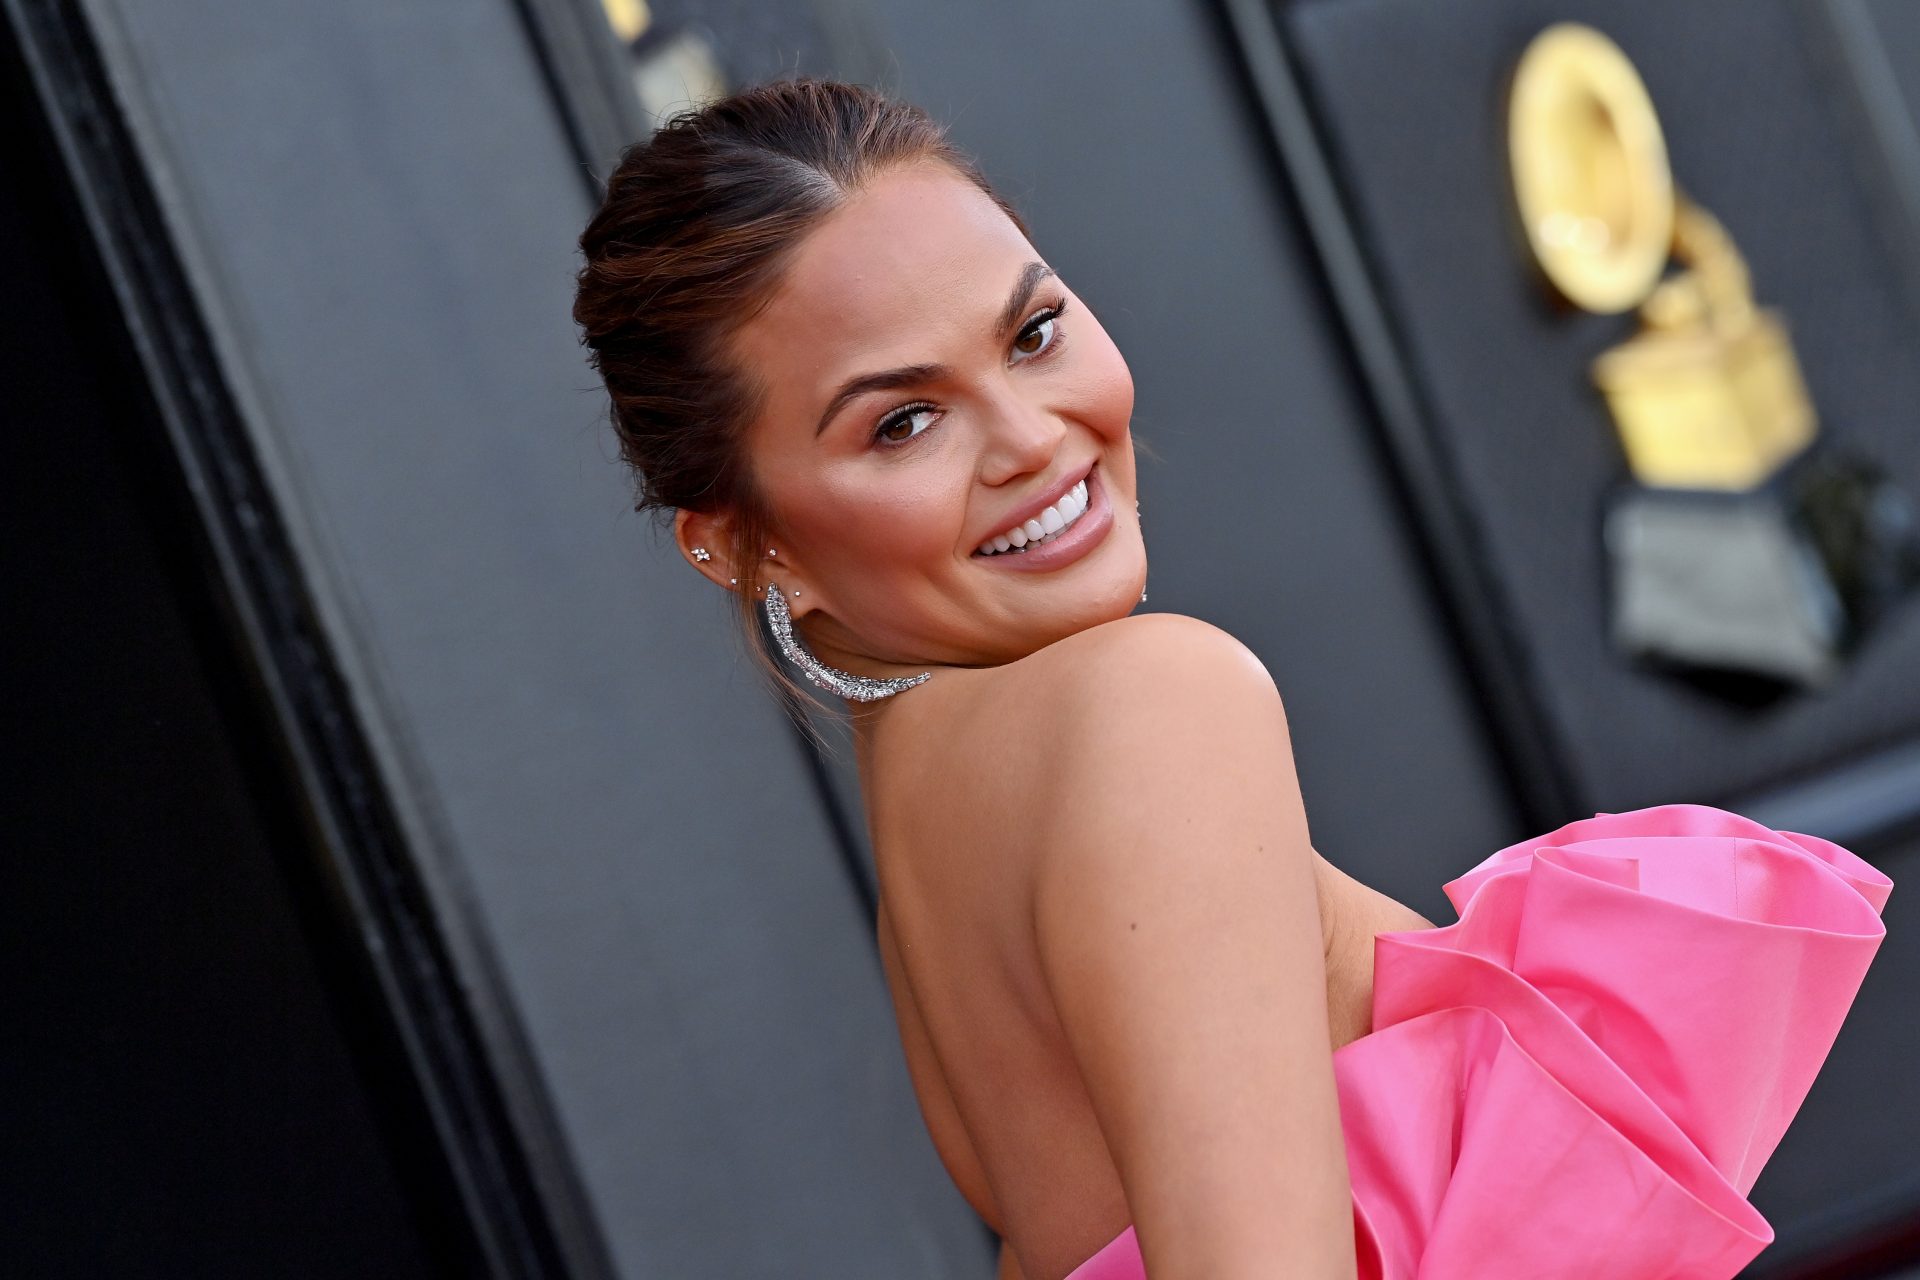 <p>Chrissy Teigen (born in 1985) has made a name for herself not only in modeling but also as a host of popular U.S. TV shows like 'Lip Sync Battle,' 'FABLife,' and 'Chrissy's Court.'</p> <p>Net worth: $100 million</p>